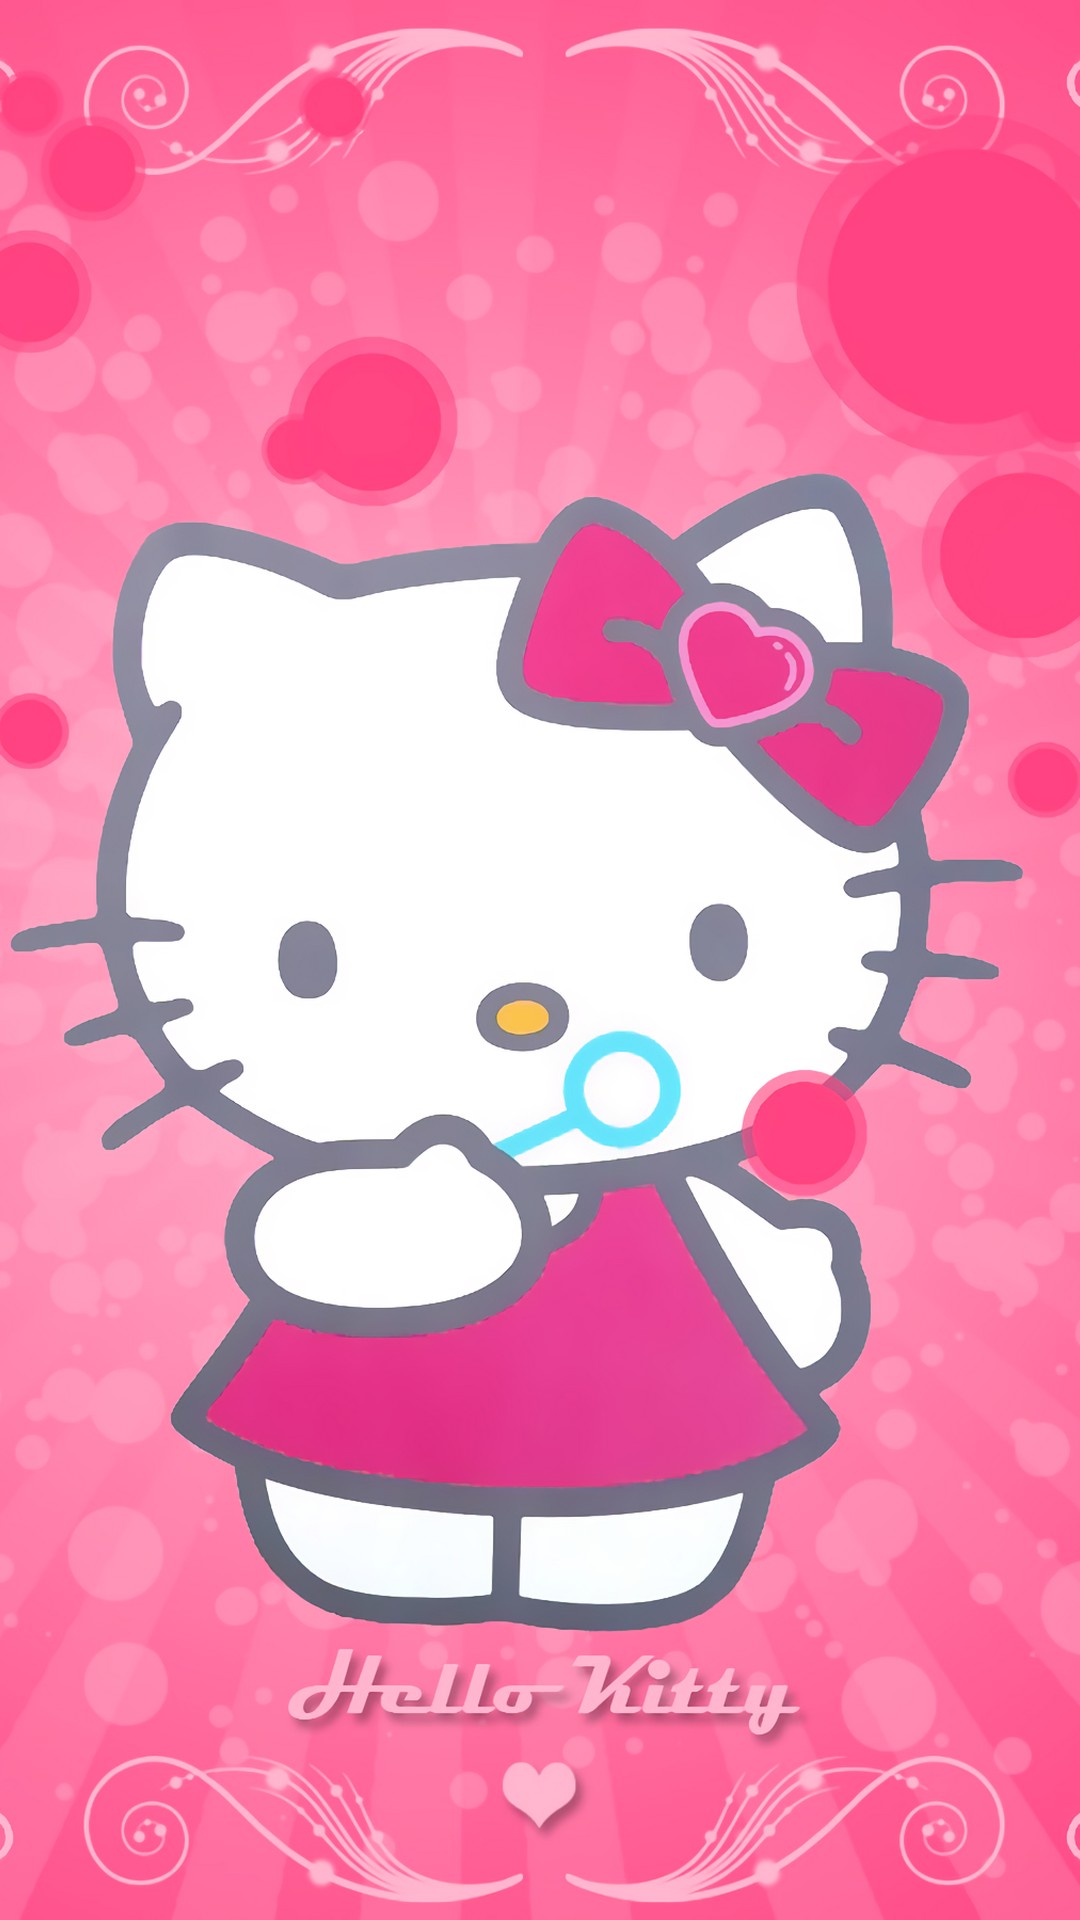 Hello Kitty Wallpaper iPhone HD with image resolution 1080x1920 pixel. You can use this wallpaper as background for your desktop Computer Screensavers, Android or iPhone smartphones